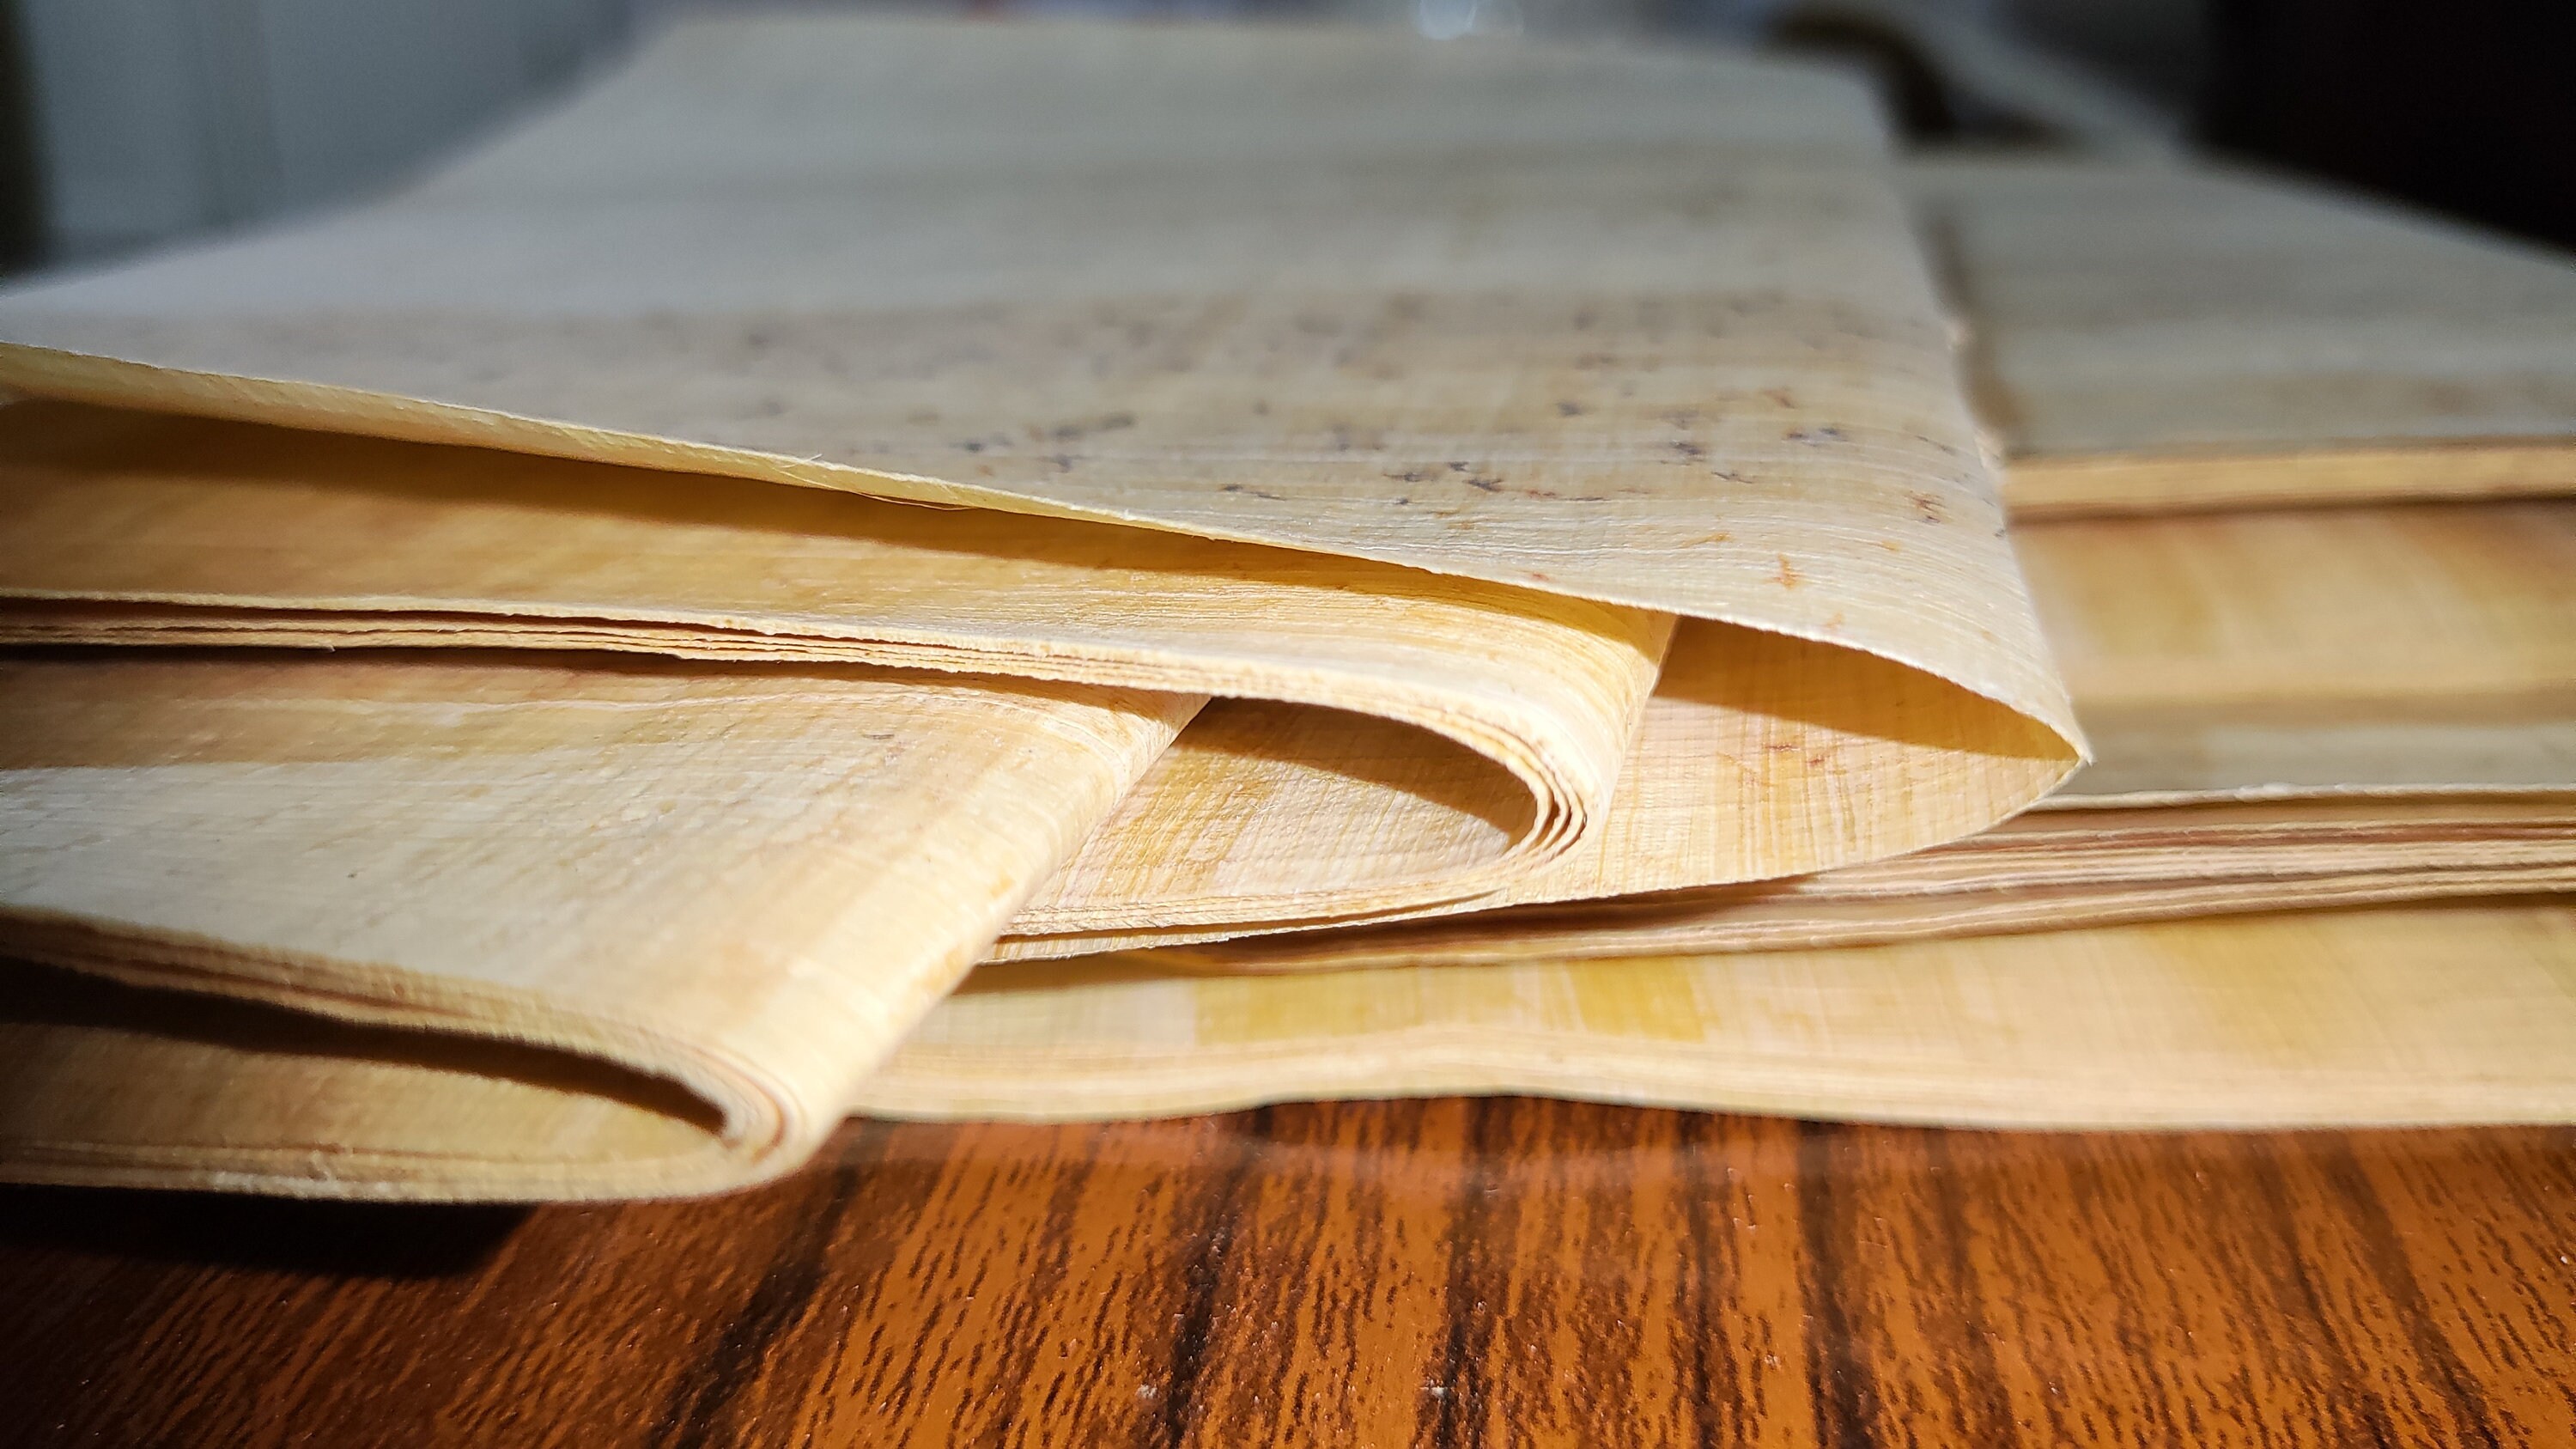 Egyptian Papyrus Journals - Innovative Journaling